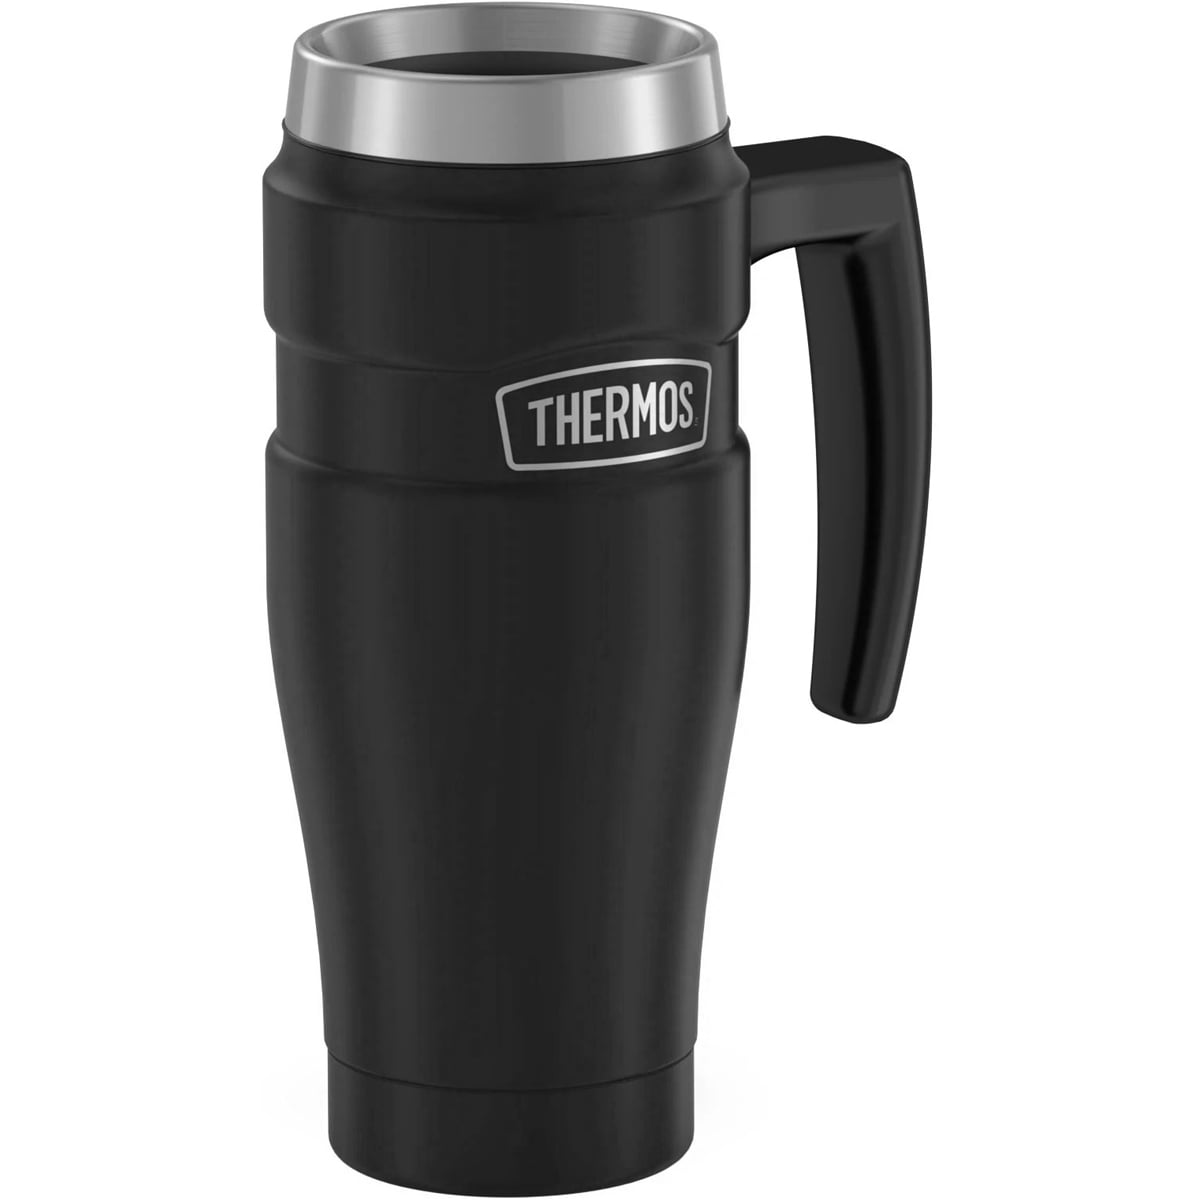  THERMOS Stainless King 16 Ounce Travel Mug with Handle, Matte  Black, Model Number: SK1000BKT4 : Home & Kitchen